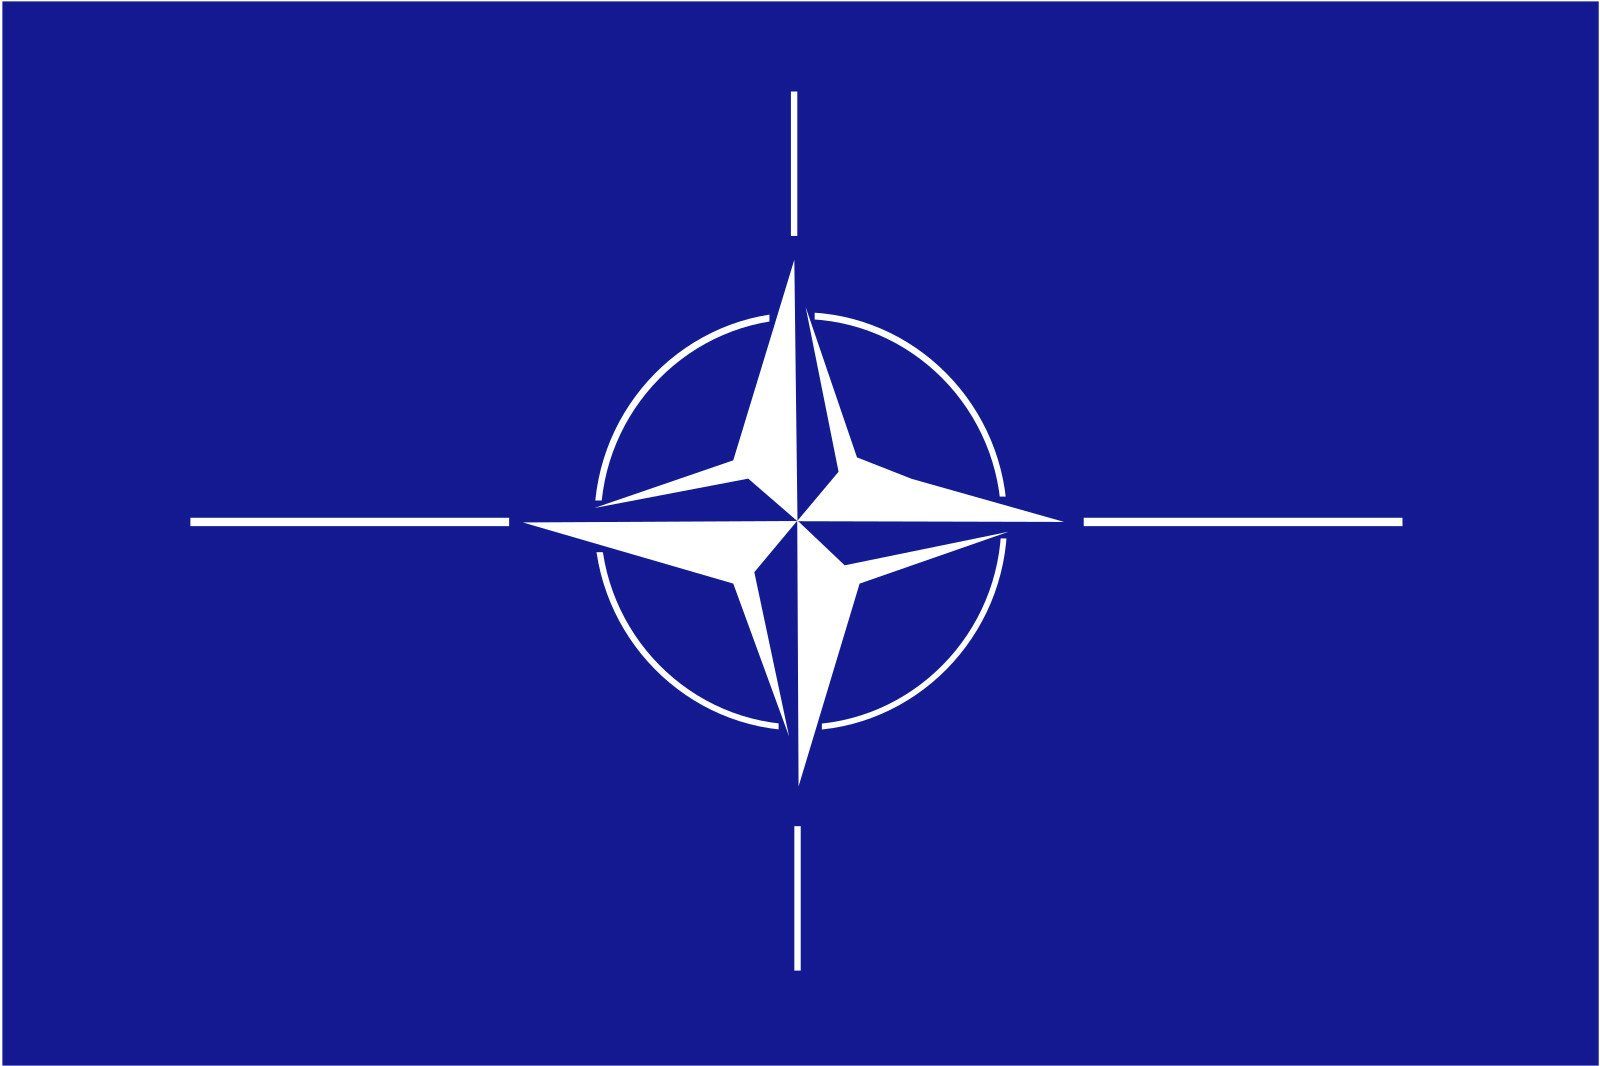 NATO Flagge 110 g/m² Flagge flaggenmeer Querformat